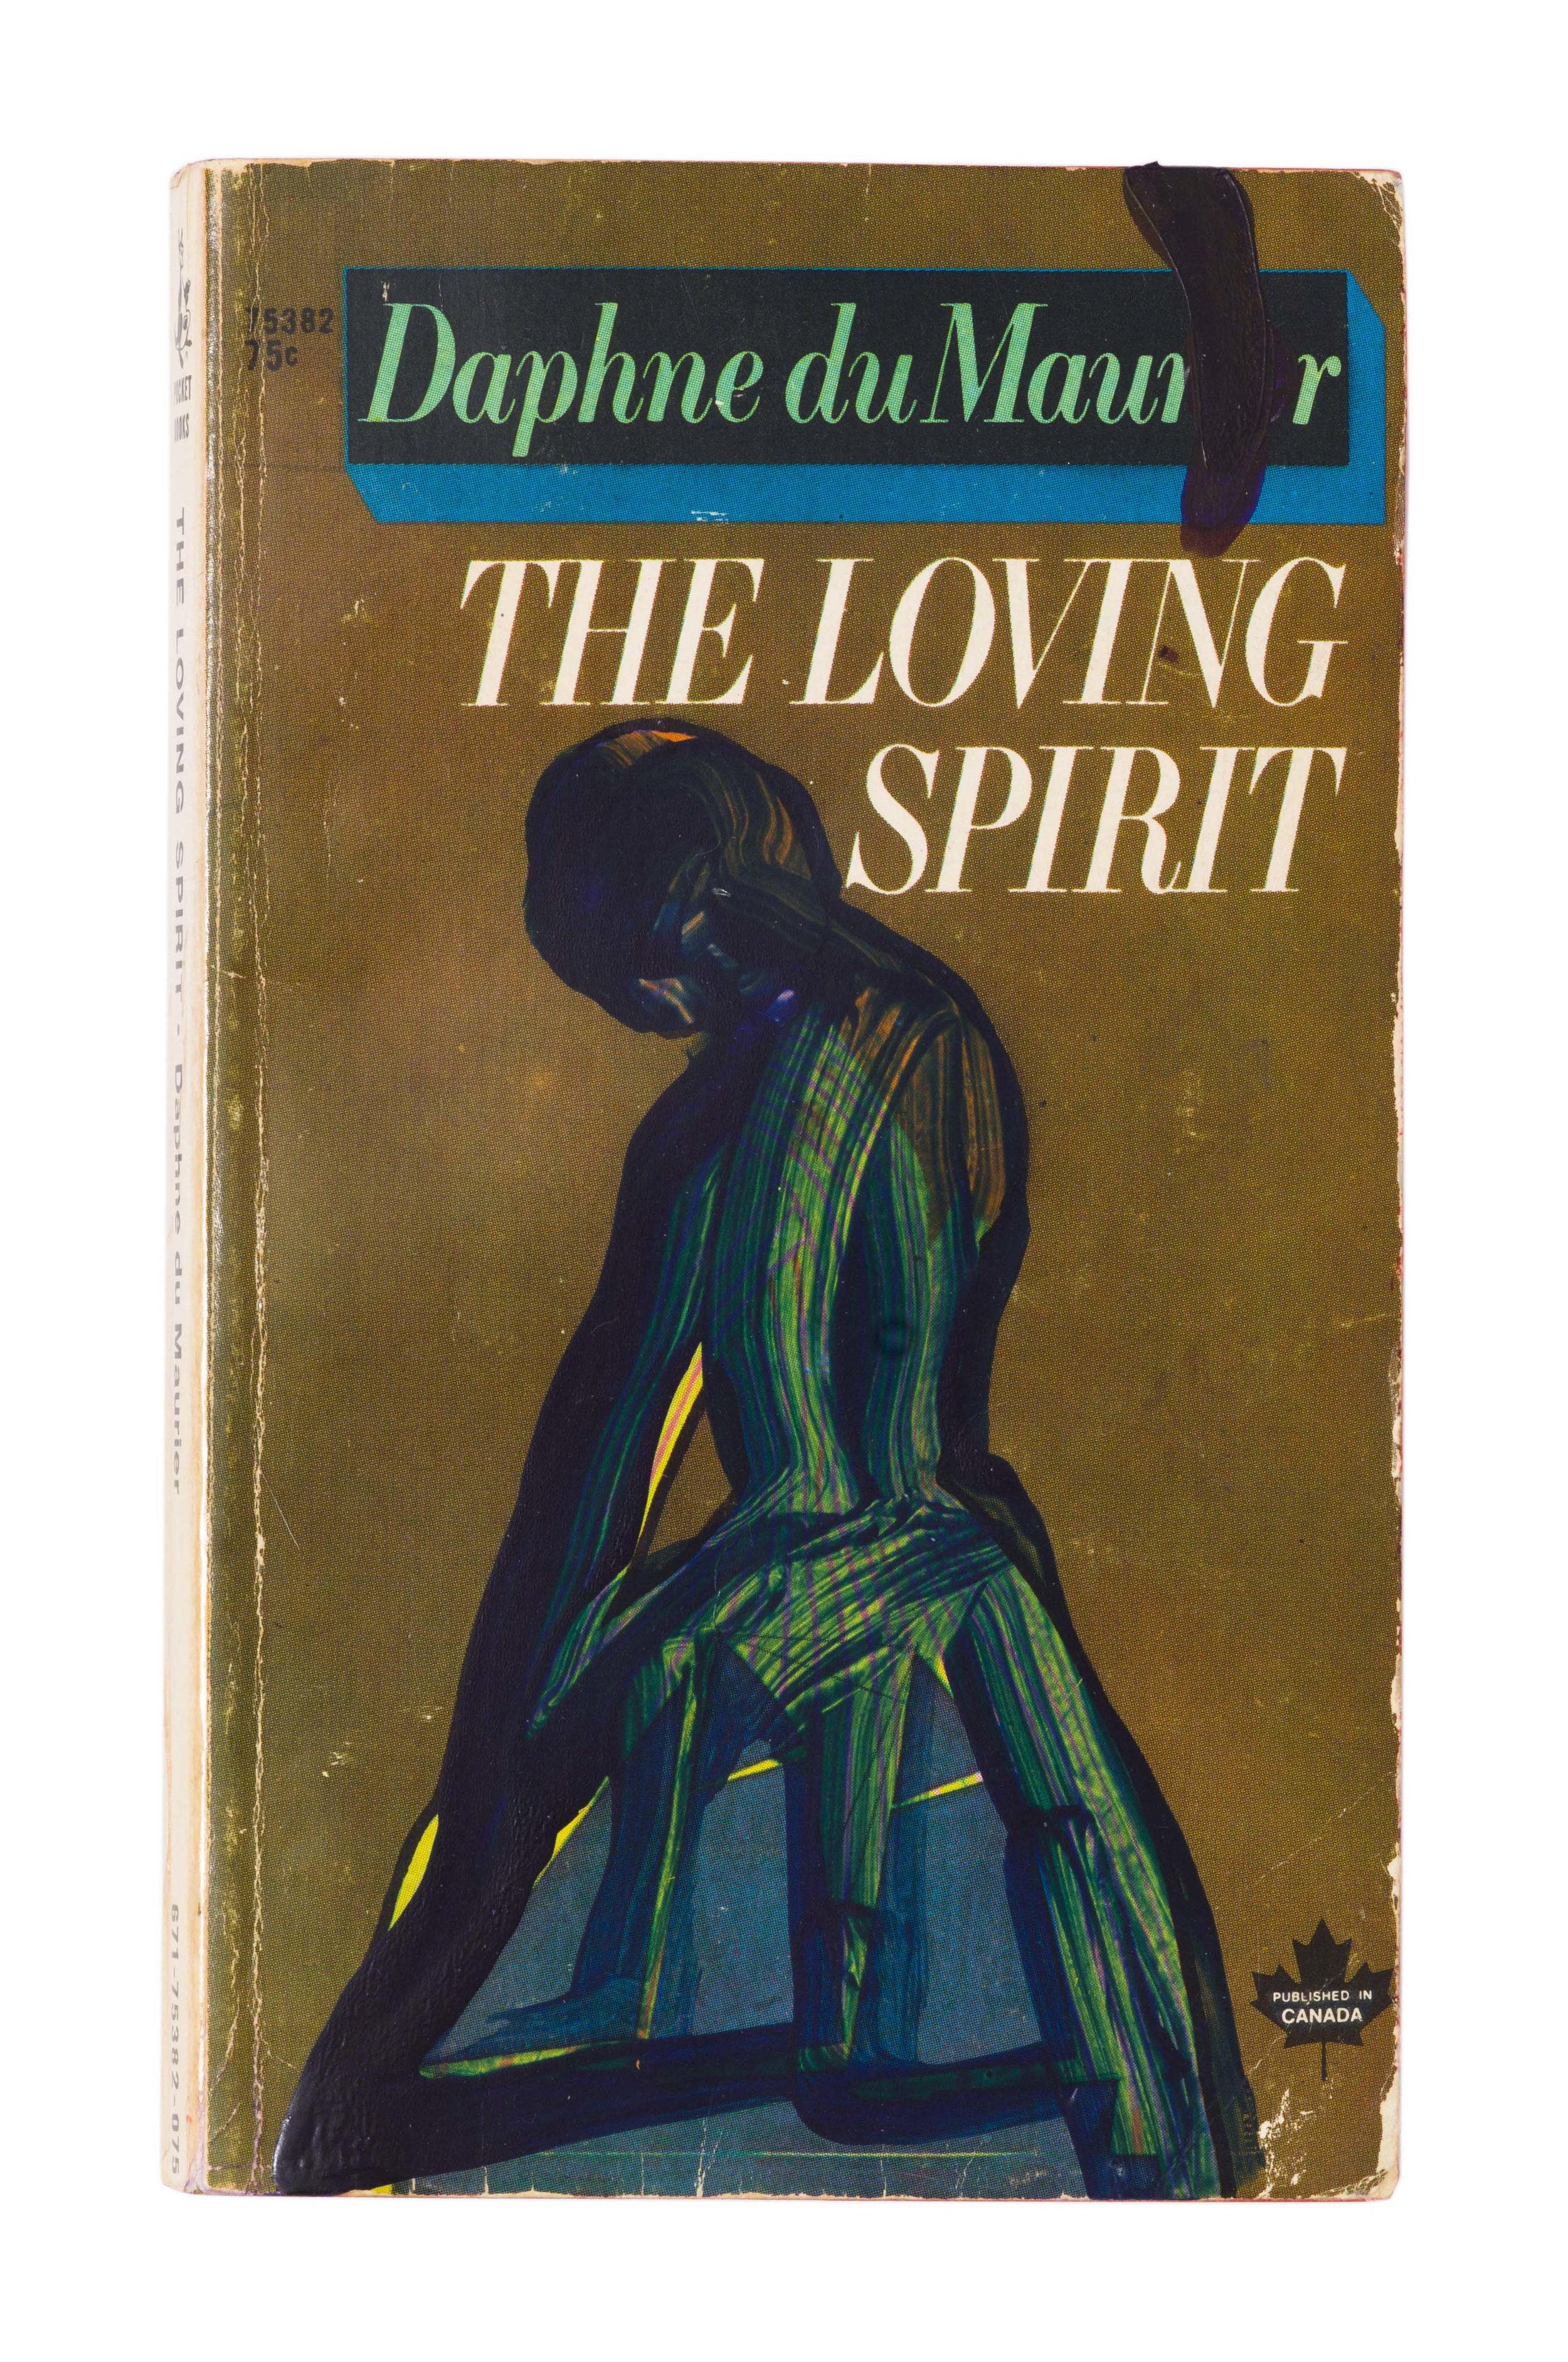  Drew Beattie and Ben Shepard  The Loving Spirit  acrylic on used book 2016 7 x 4 ¼ inches 